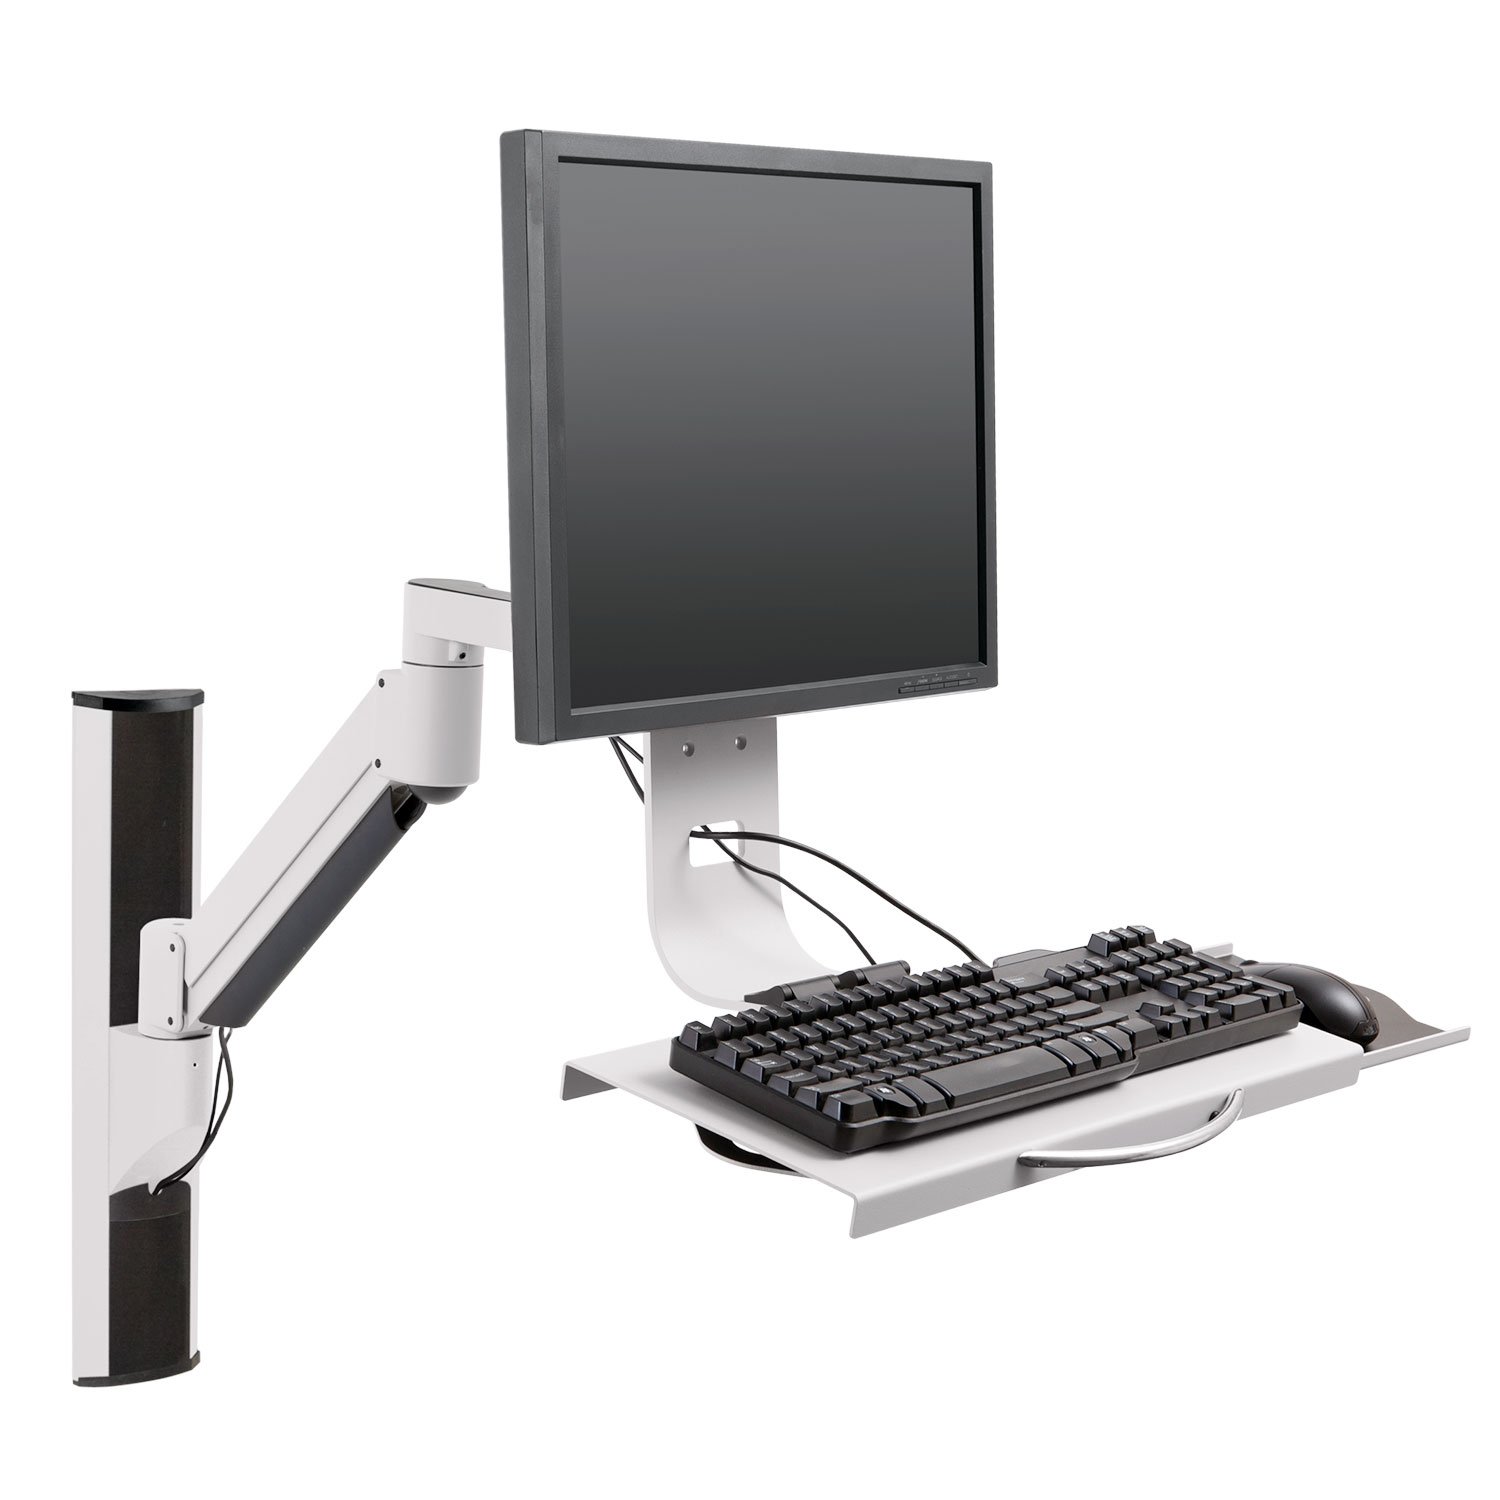 8326 Wall track with 7509 monitor arm with flip-up keyboard	